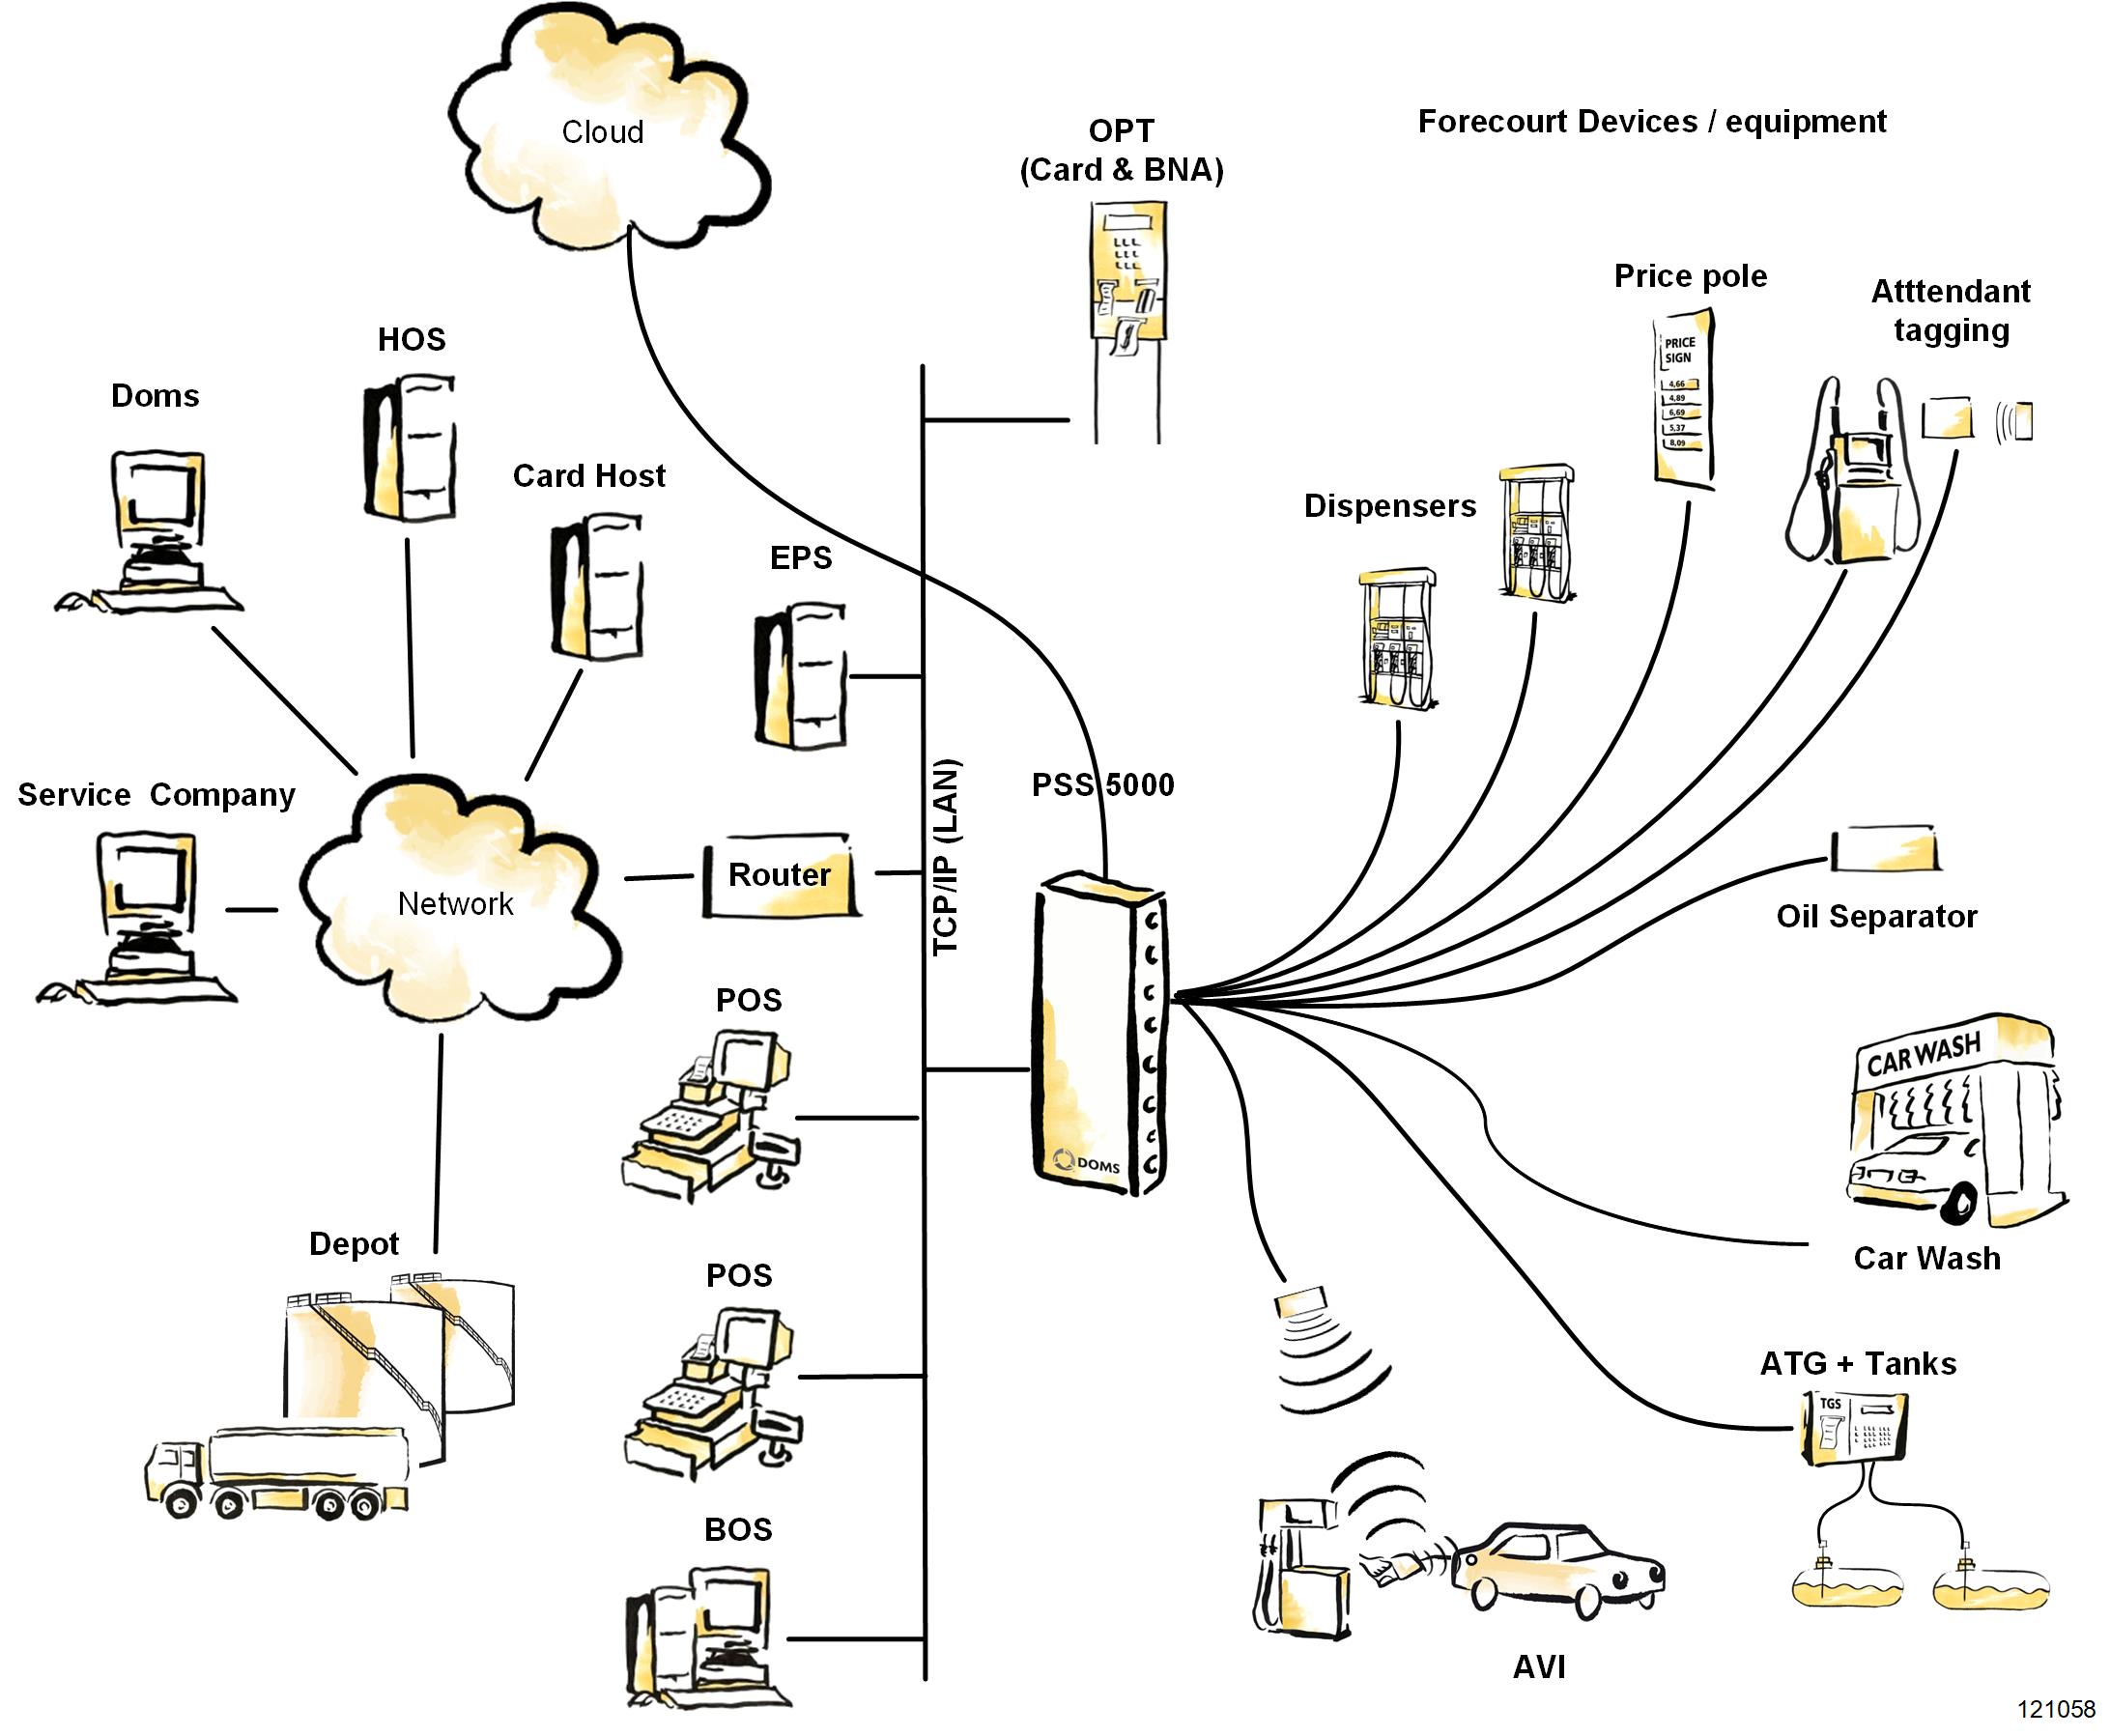 Simplified network where fuel trucks receive real-time data while loading at depots